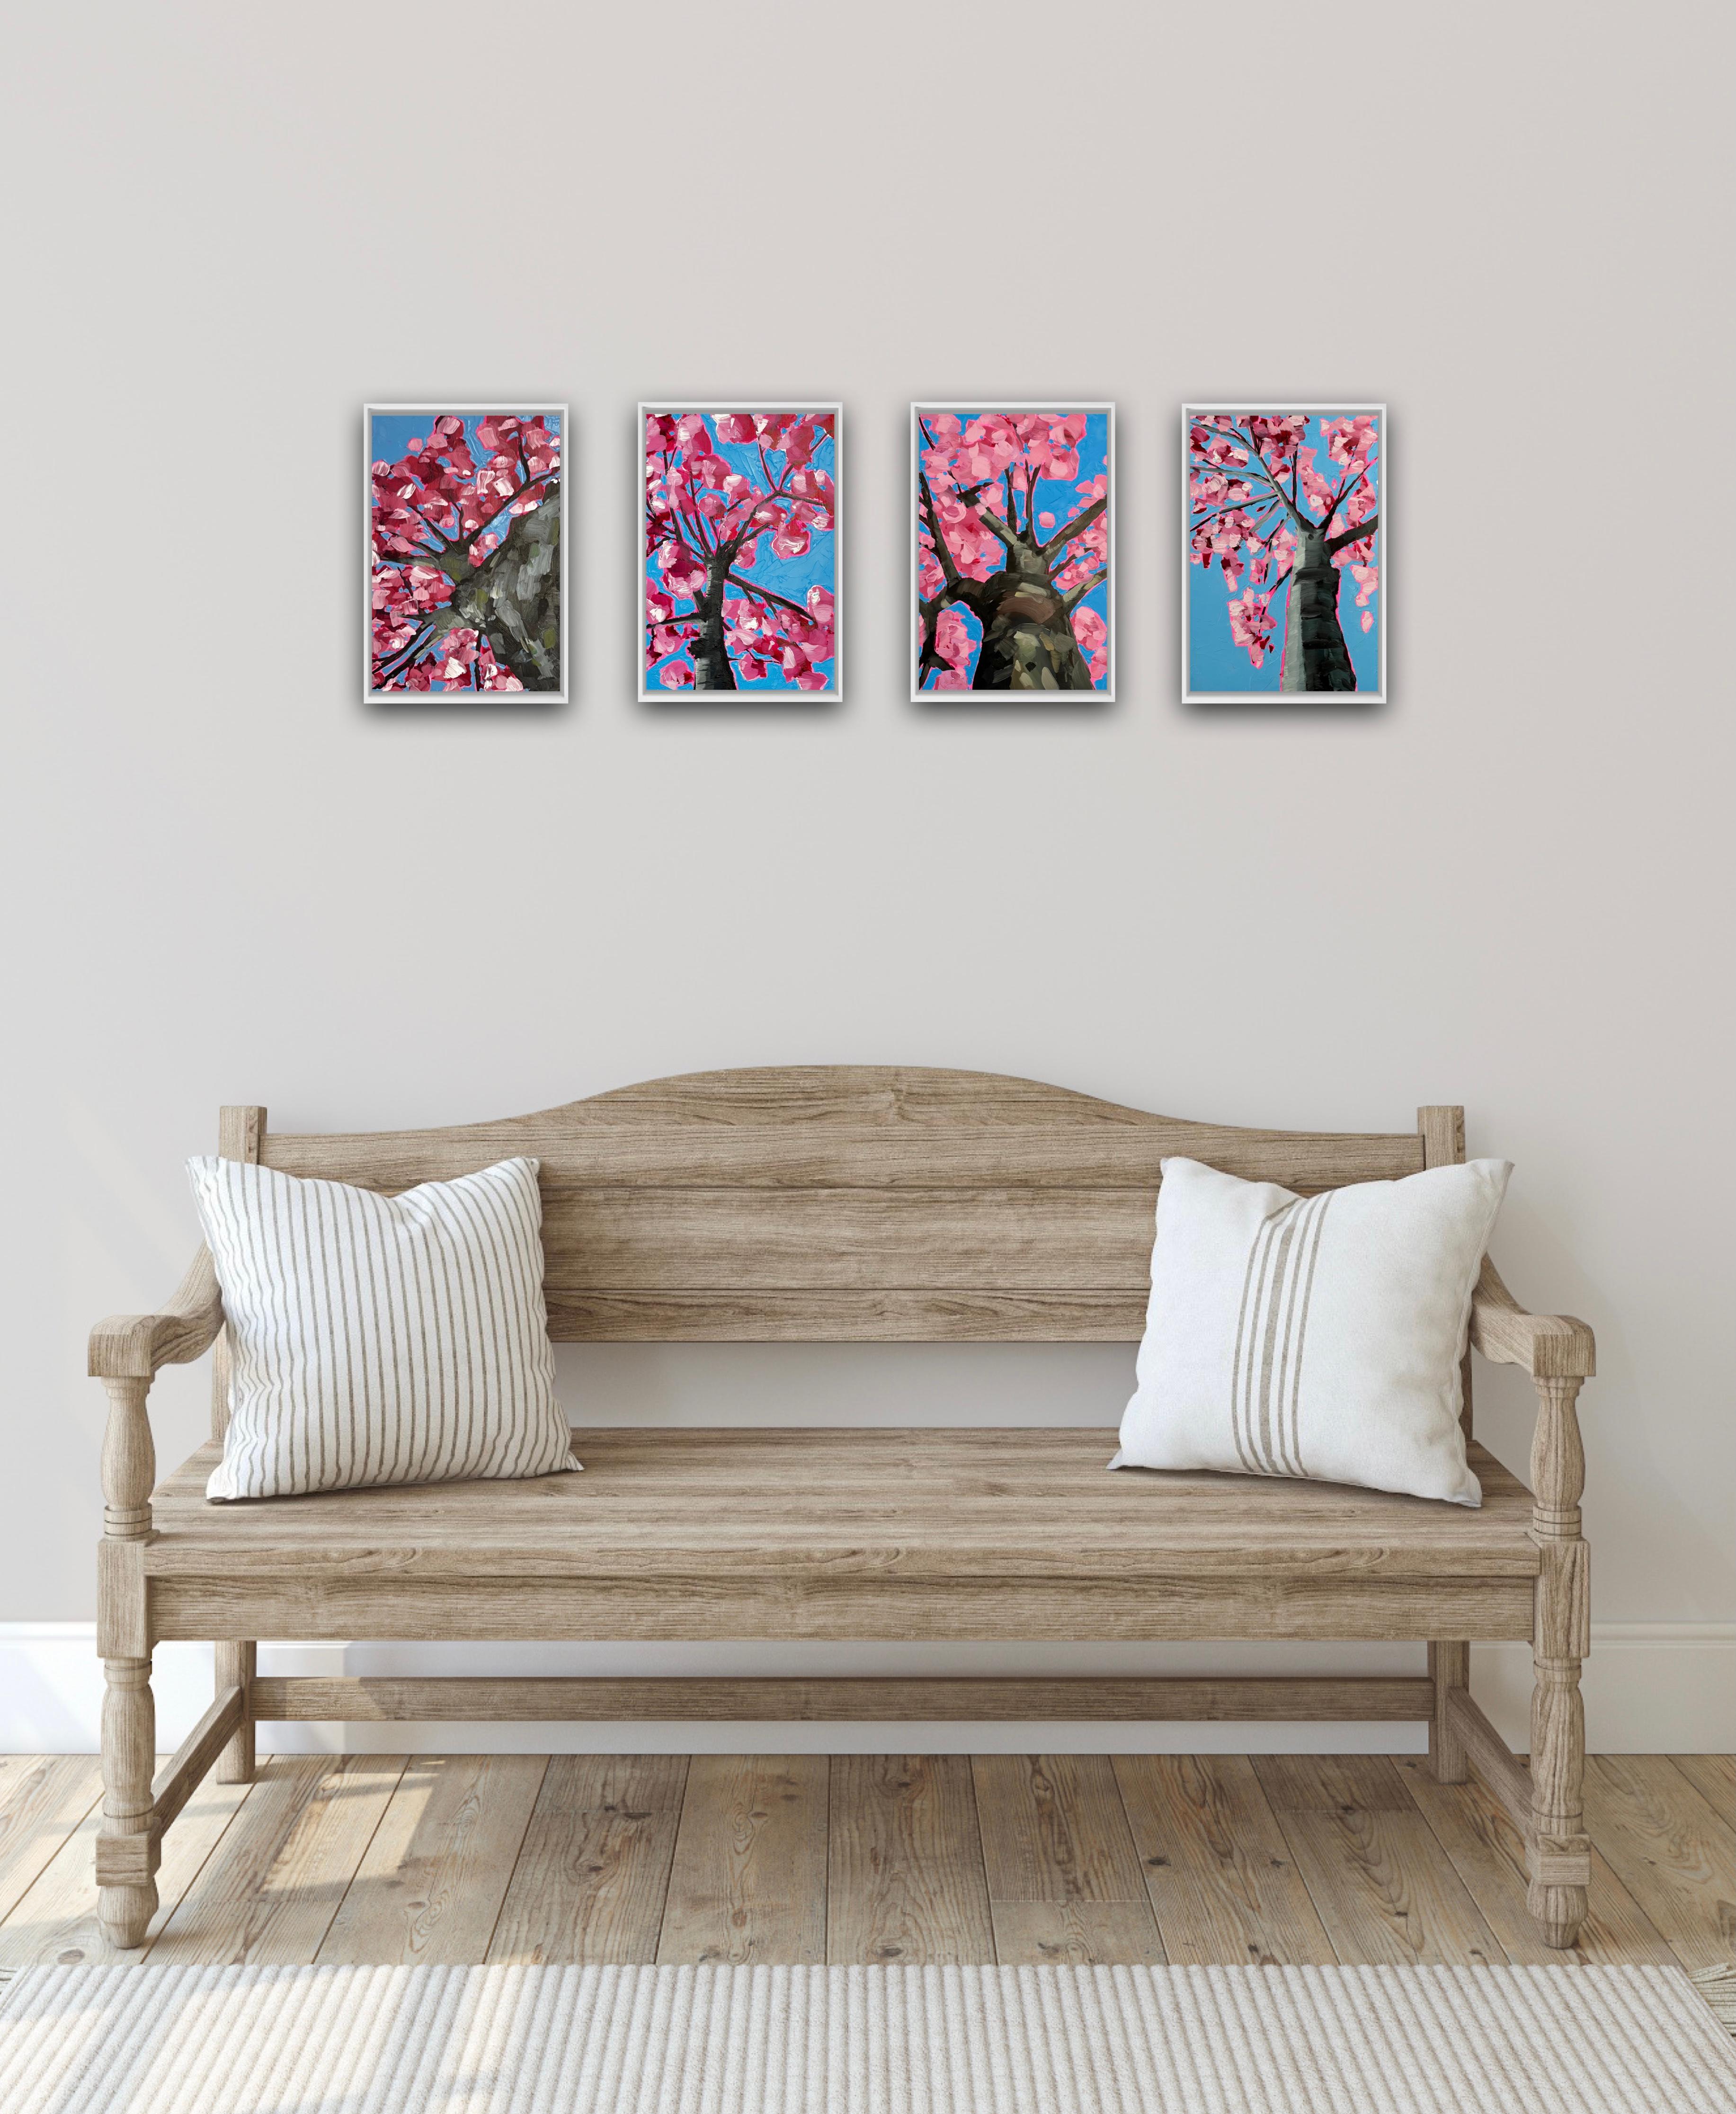 Looking Up Through Pink Blossoms Quadtych  - Gray Abstract Painting by Emily Finch